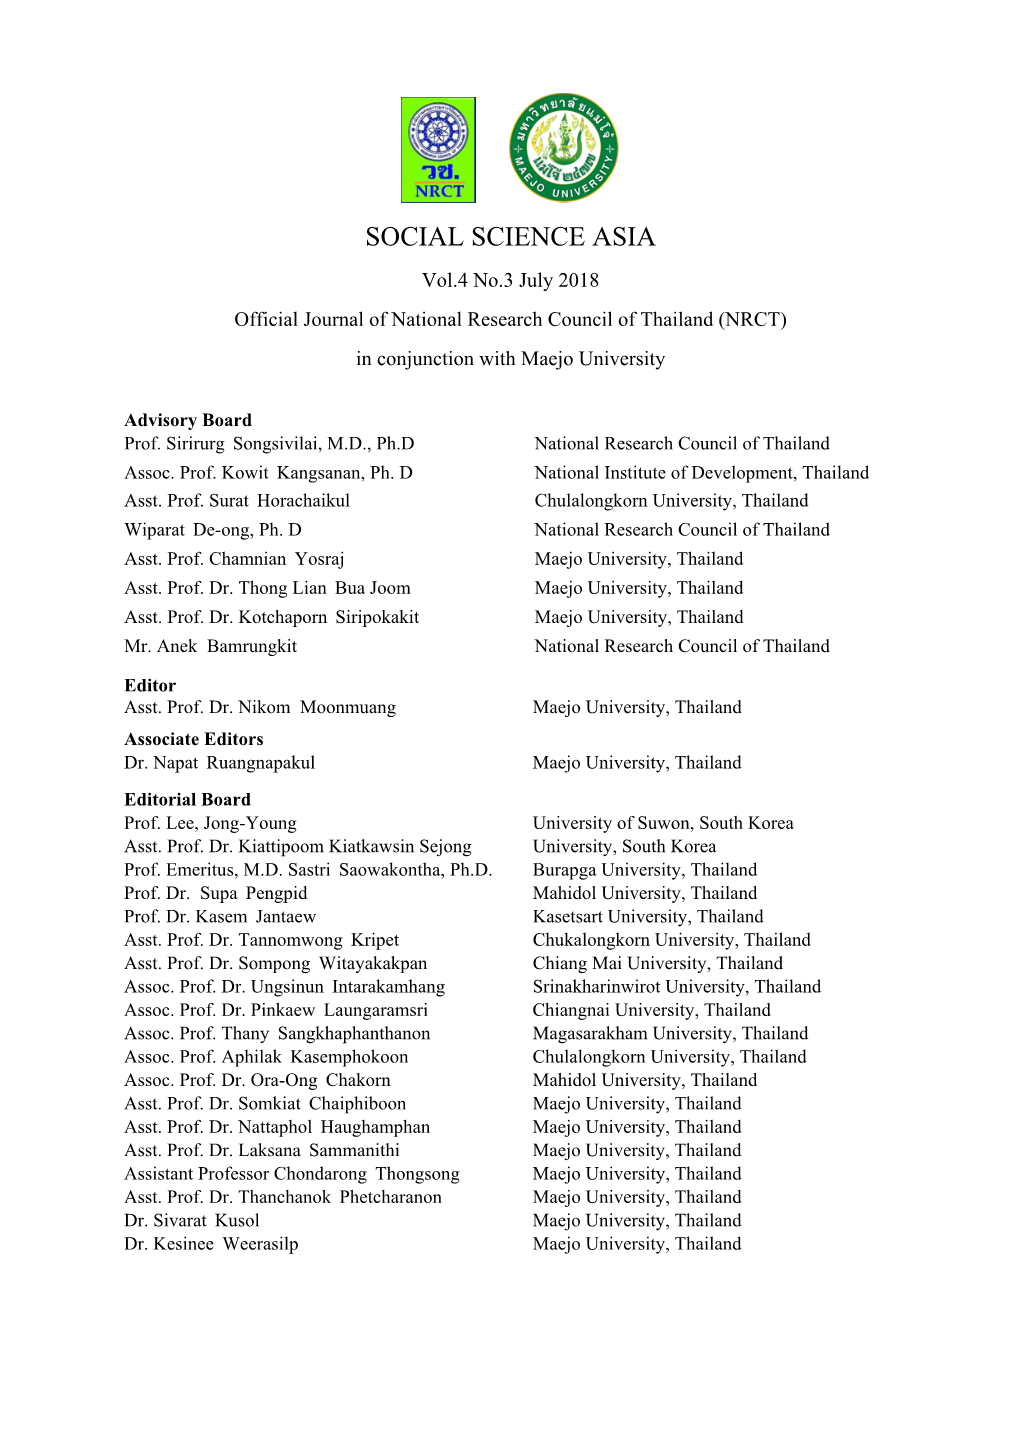 SOCIAL SCIENCE ASIA Vol.4 No.3 July 2018 Official Journal of National Research Council of Thailand (NRCT) in Conjunction with Maejo University